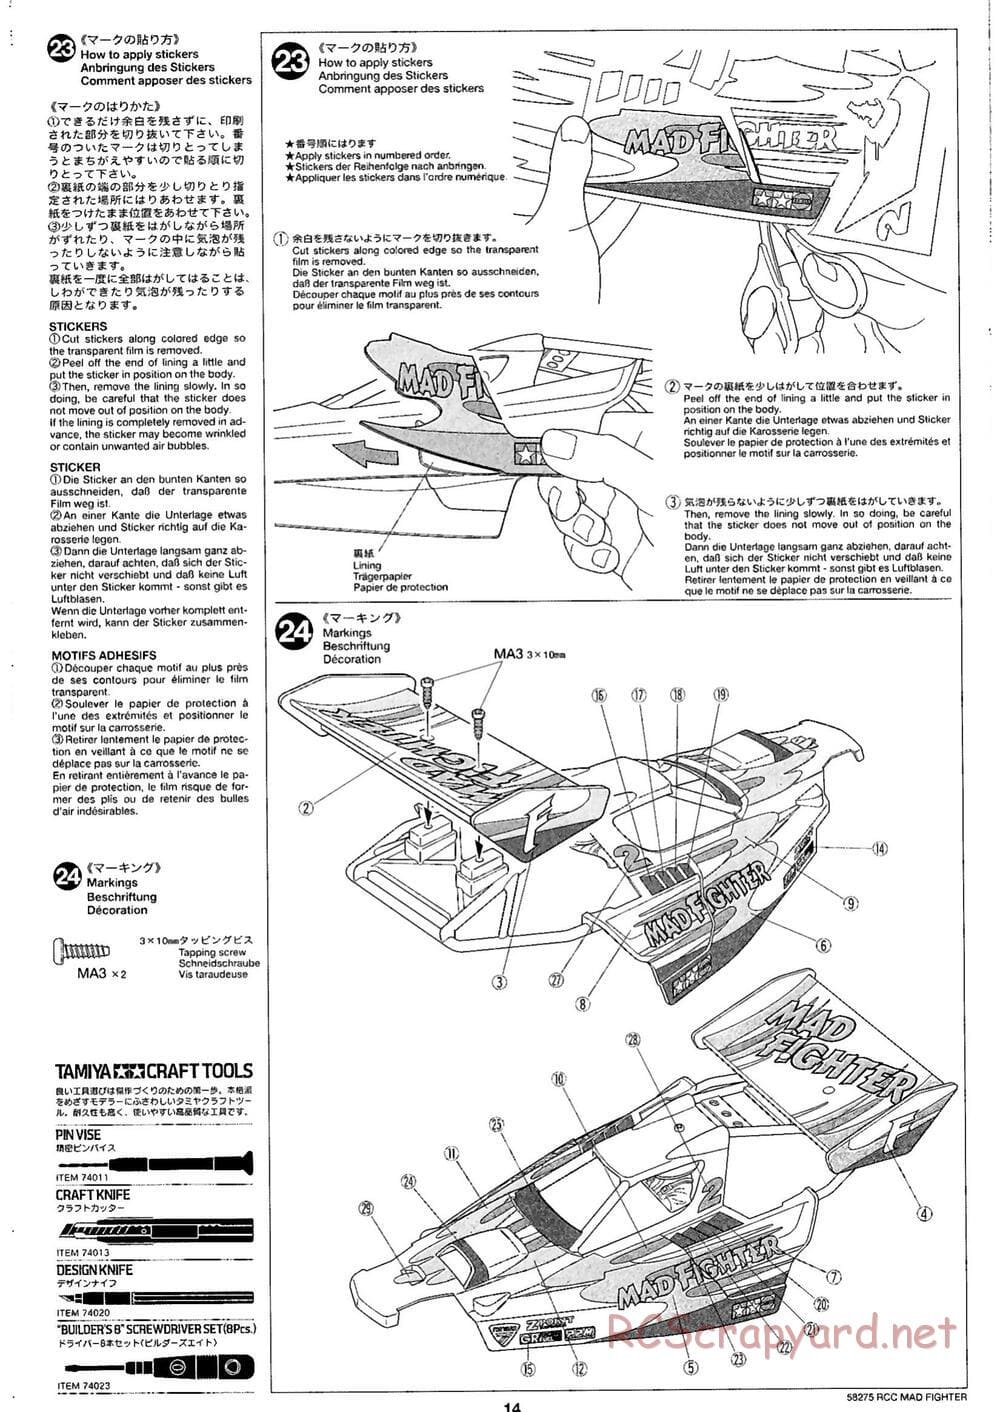 Tamiya - Mad Fighter Chassis - Manual - Page 14